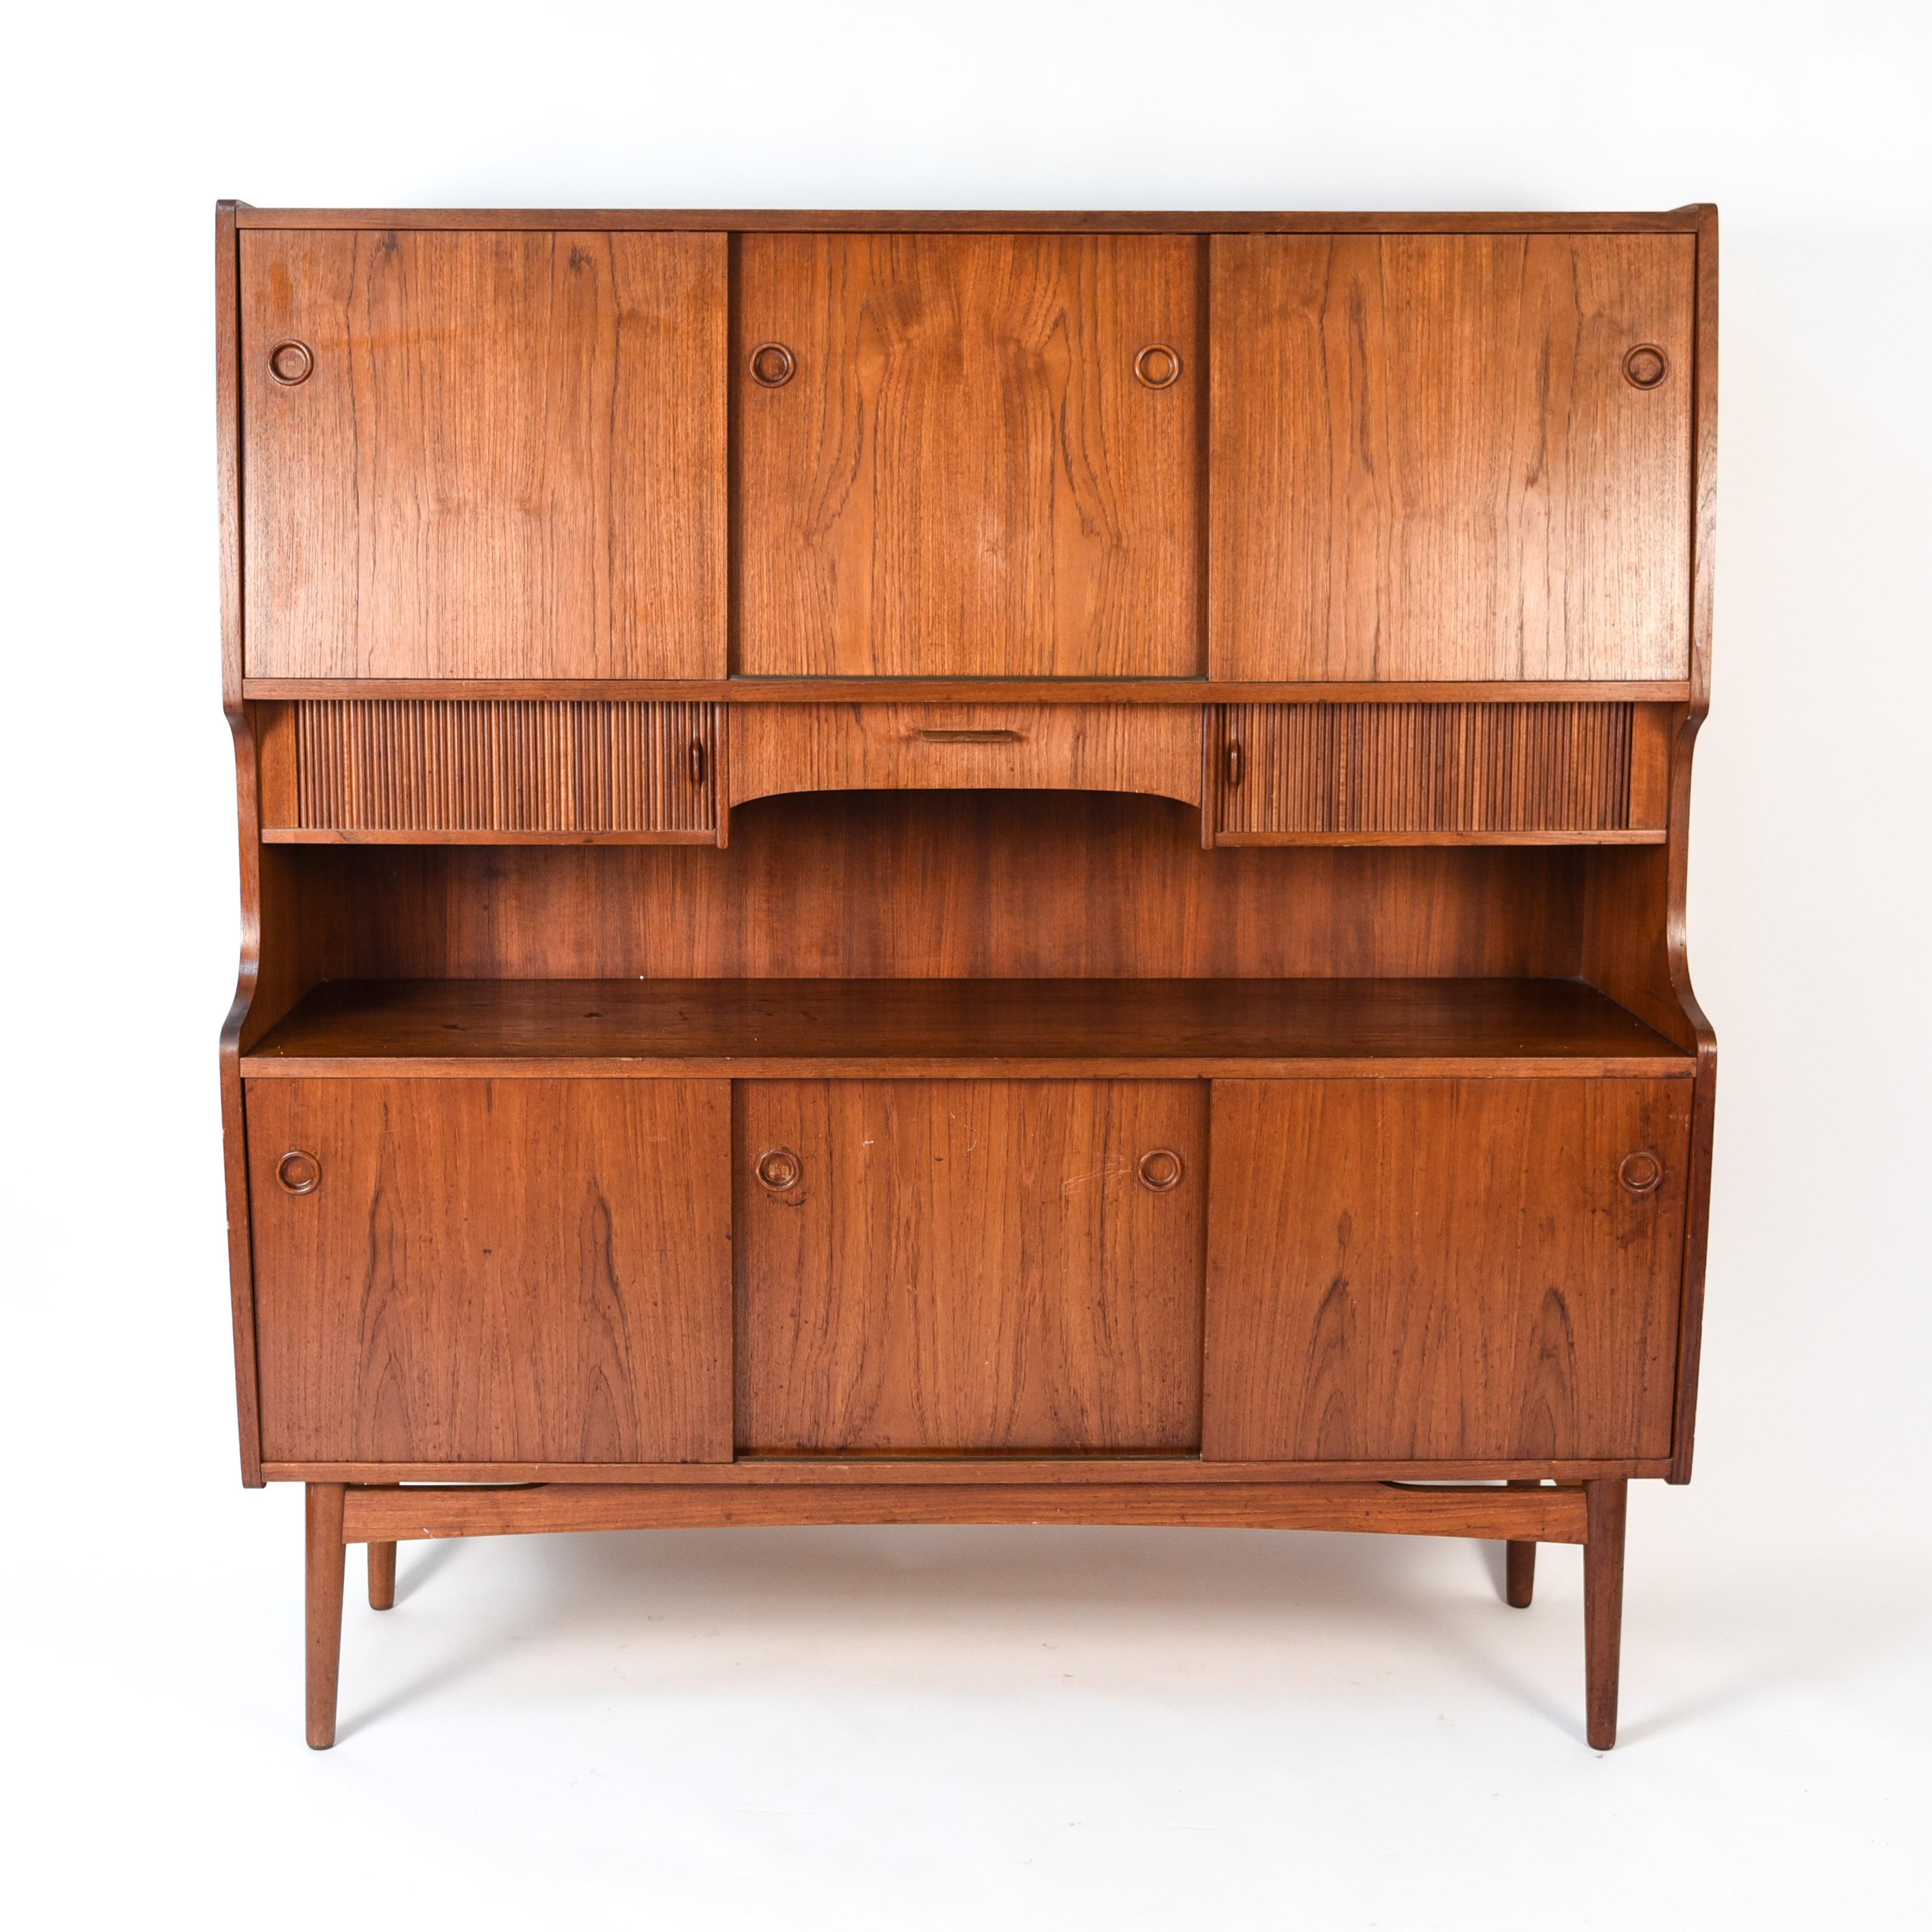 This Danish midcentury highboard is a bold statement piece designed by Johannes Sorth for Nexo Mobelfabrik. This highboard features multiple cabinet areas enclosed by sliding doors with circular recessed handles, as well as smaller compartments with